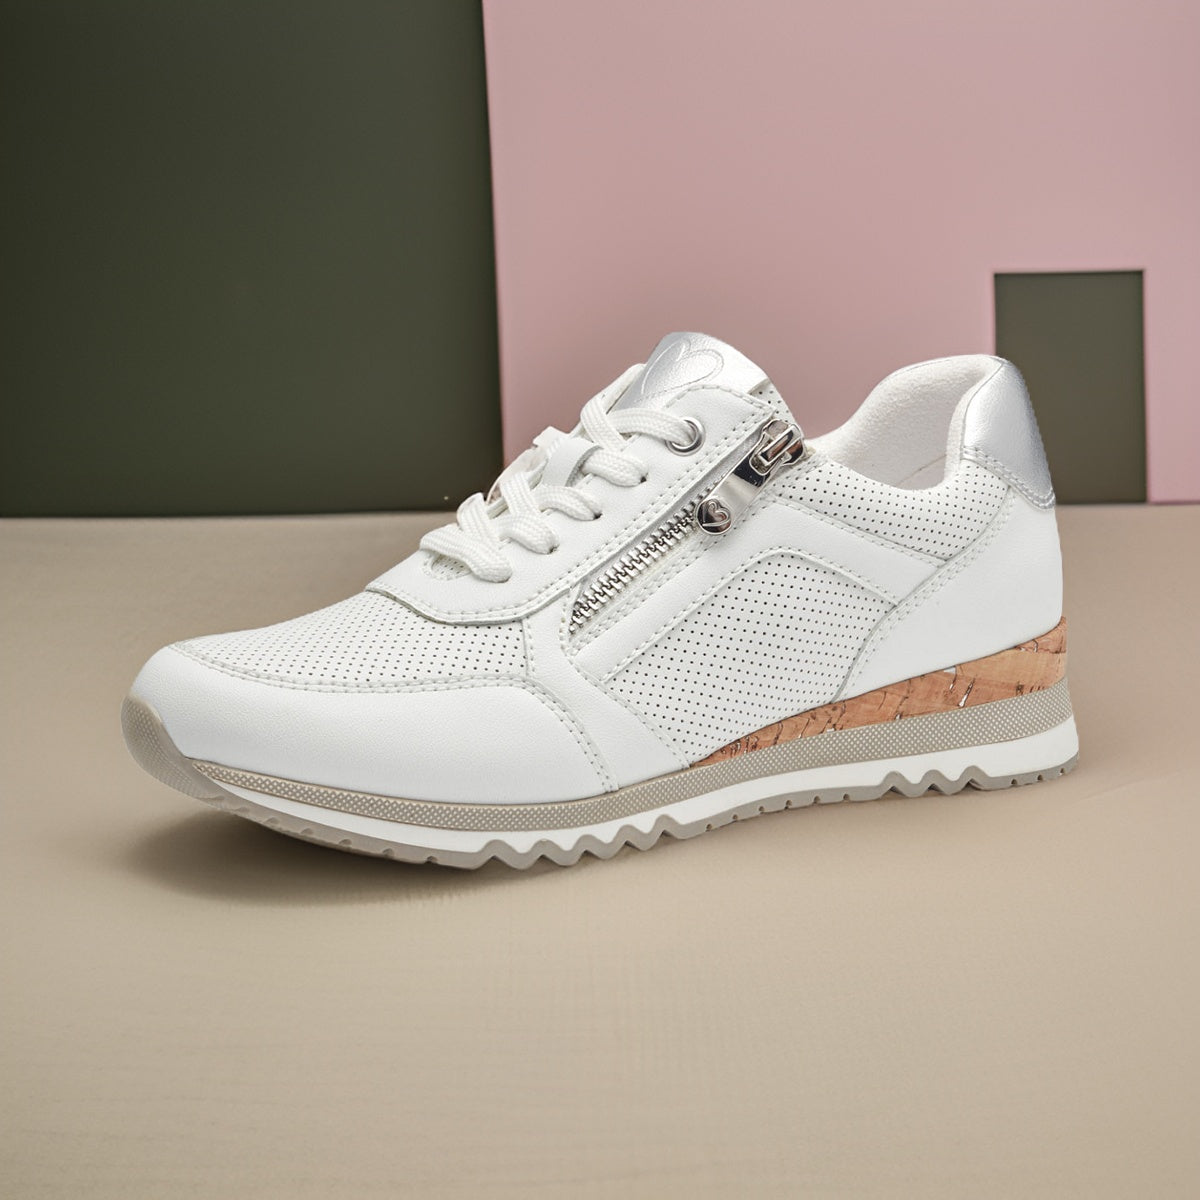 Marco Tozzi White Runner with Wedge Sole and Silver Detail